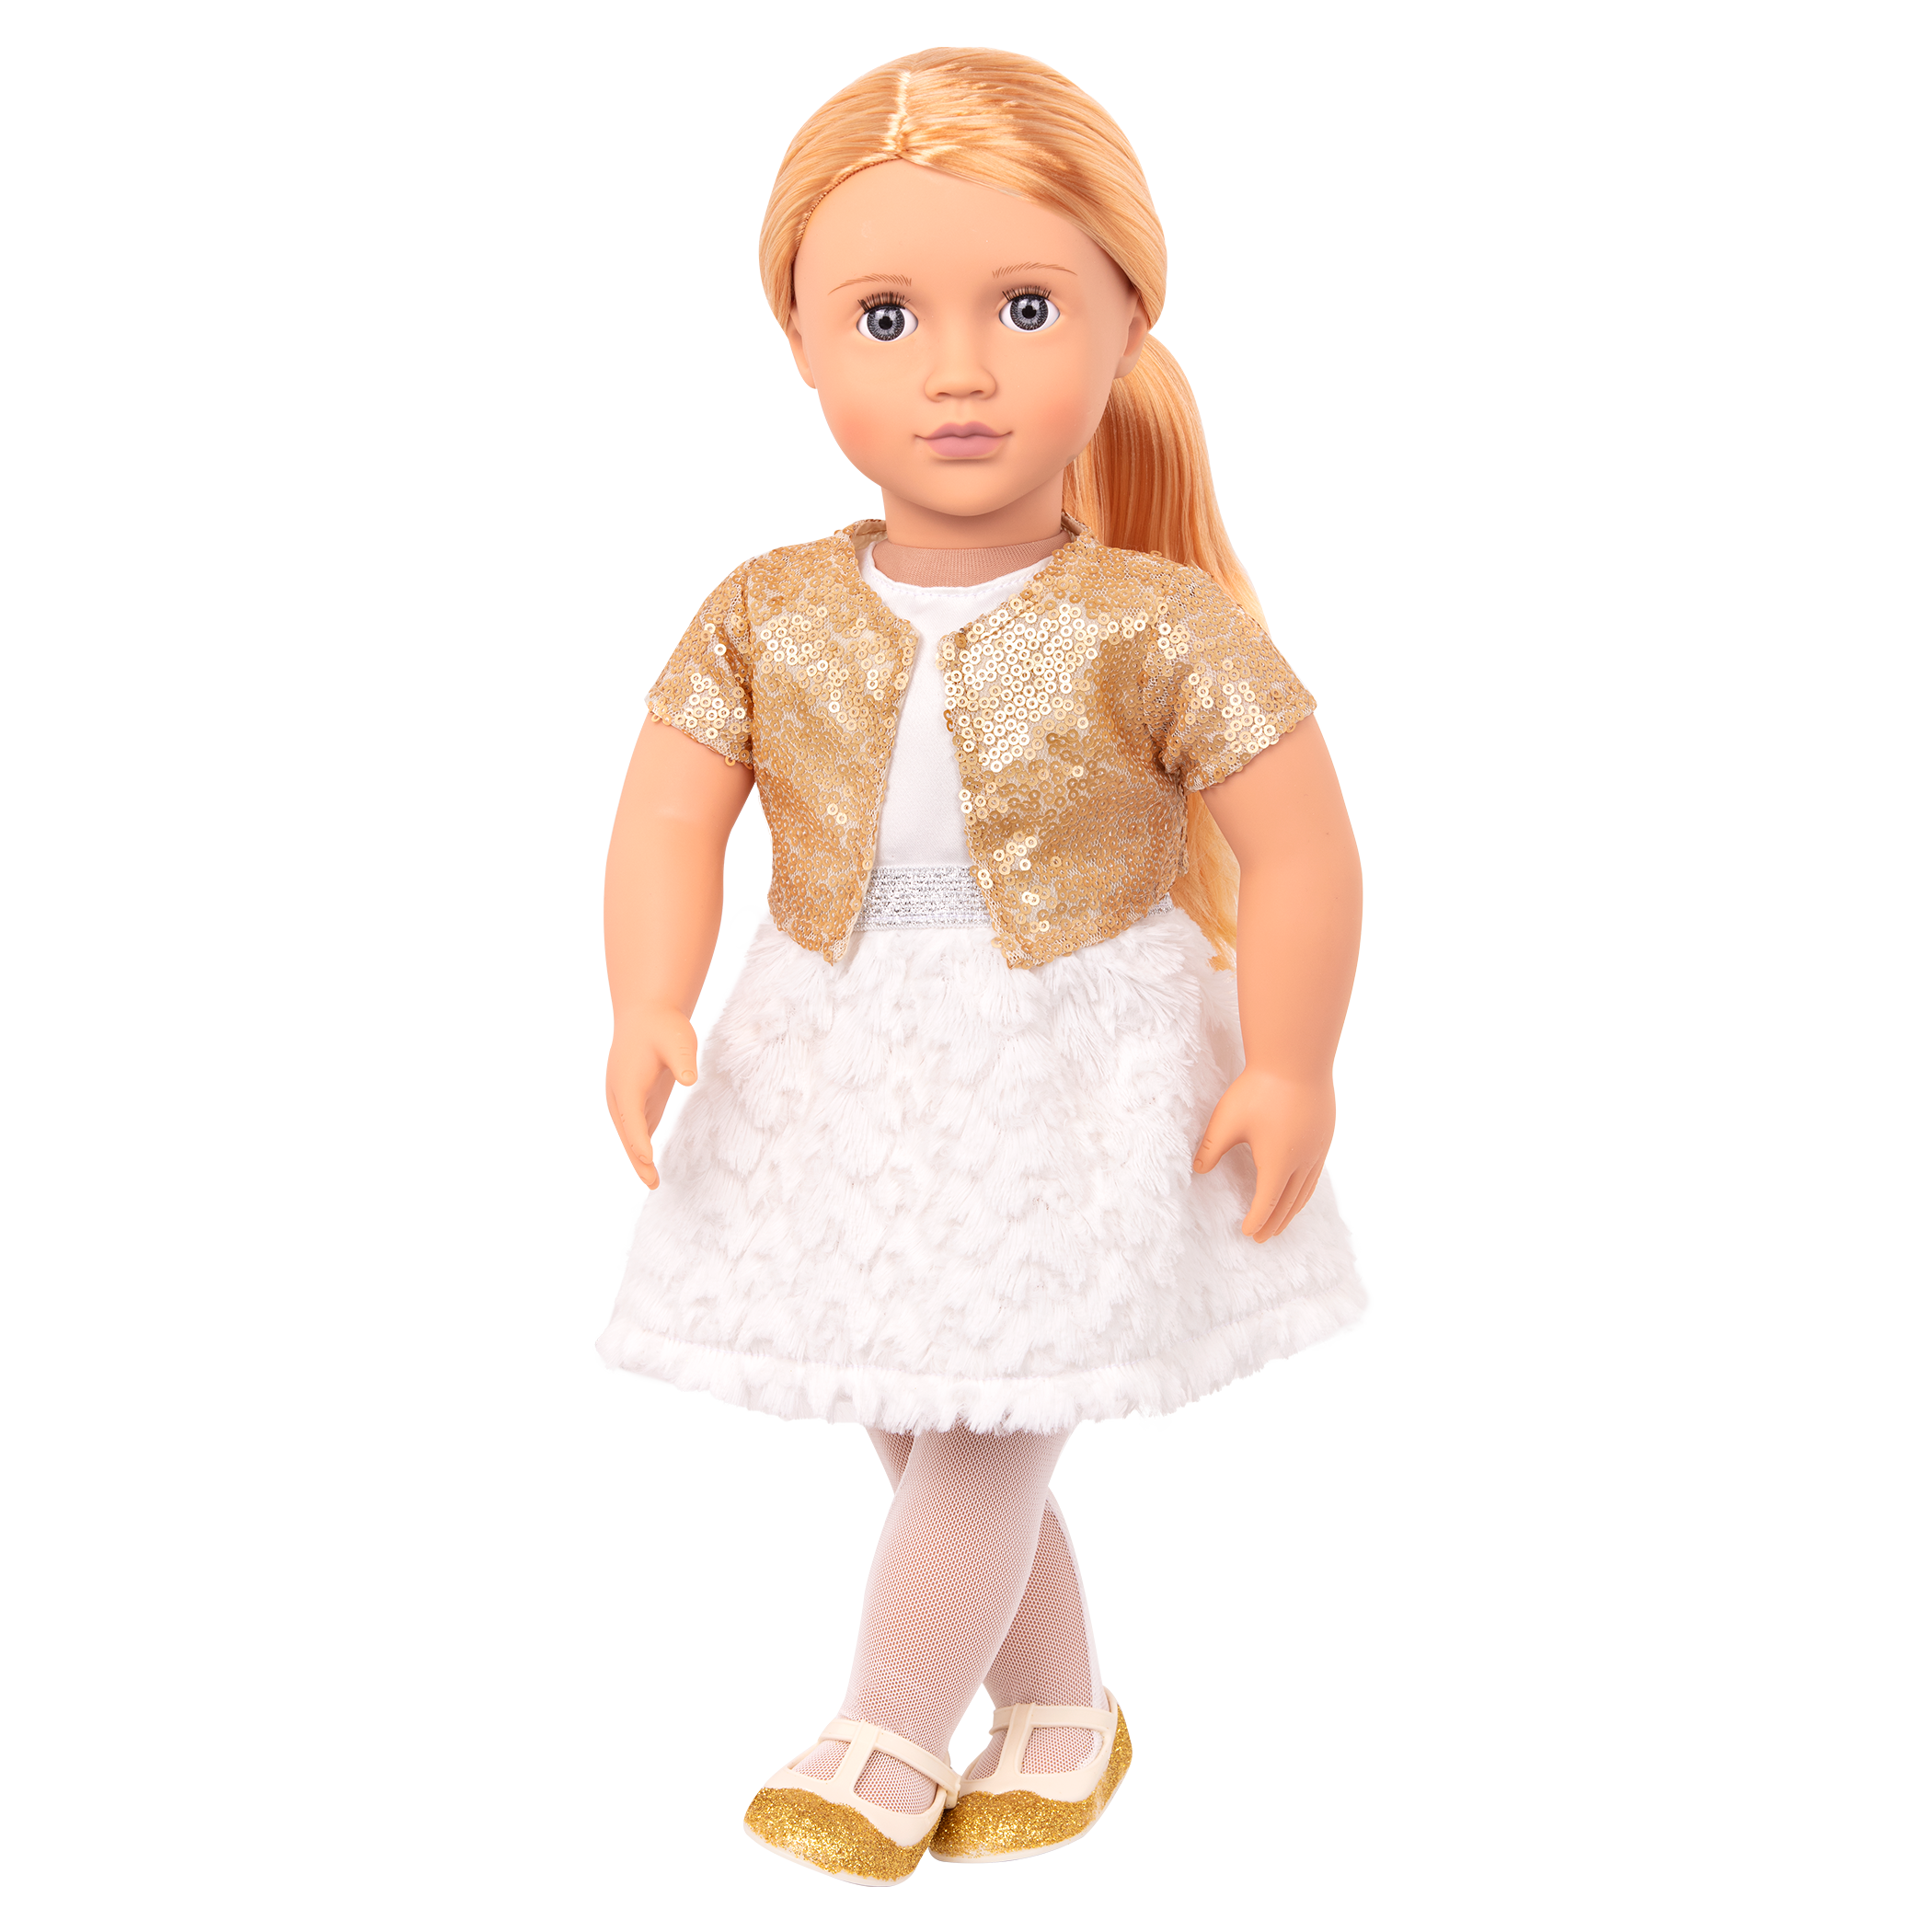 AMERICAN GIRL OUR GENERATION CUTE FRIENDS DRESS COLLECTION 18 INCH DOLL CLOTHES 